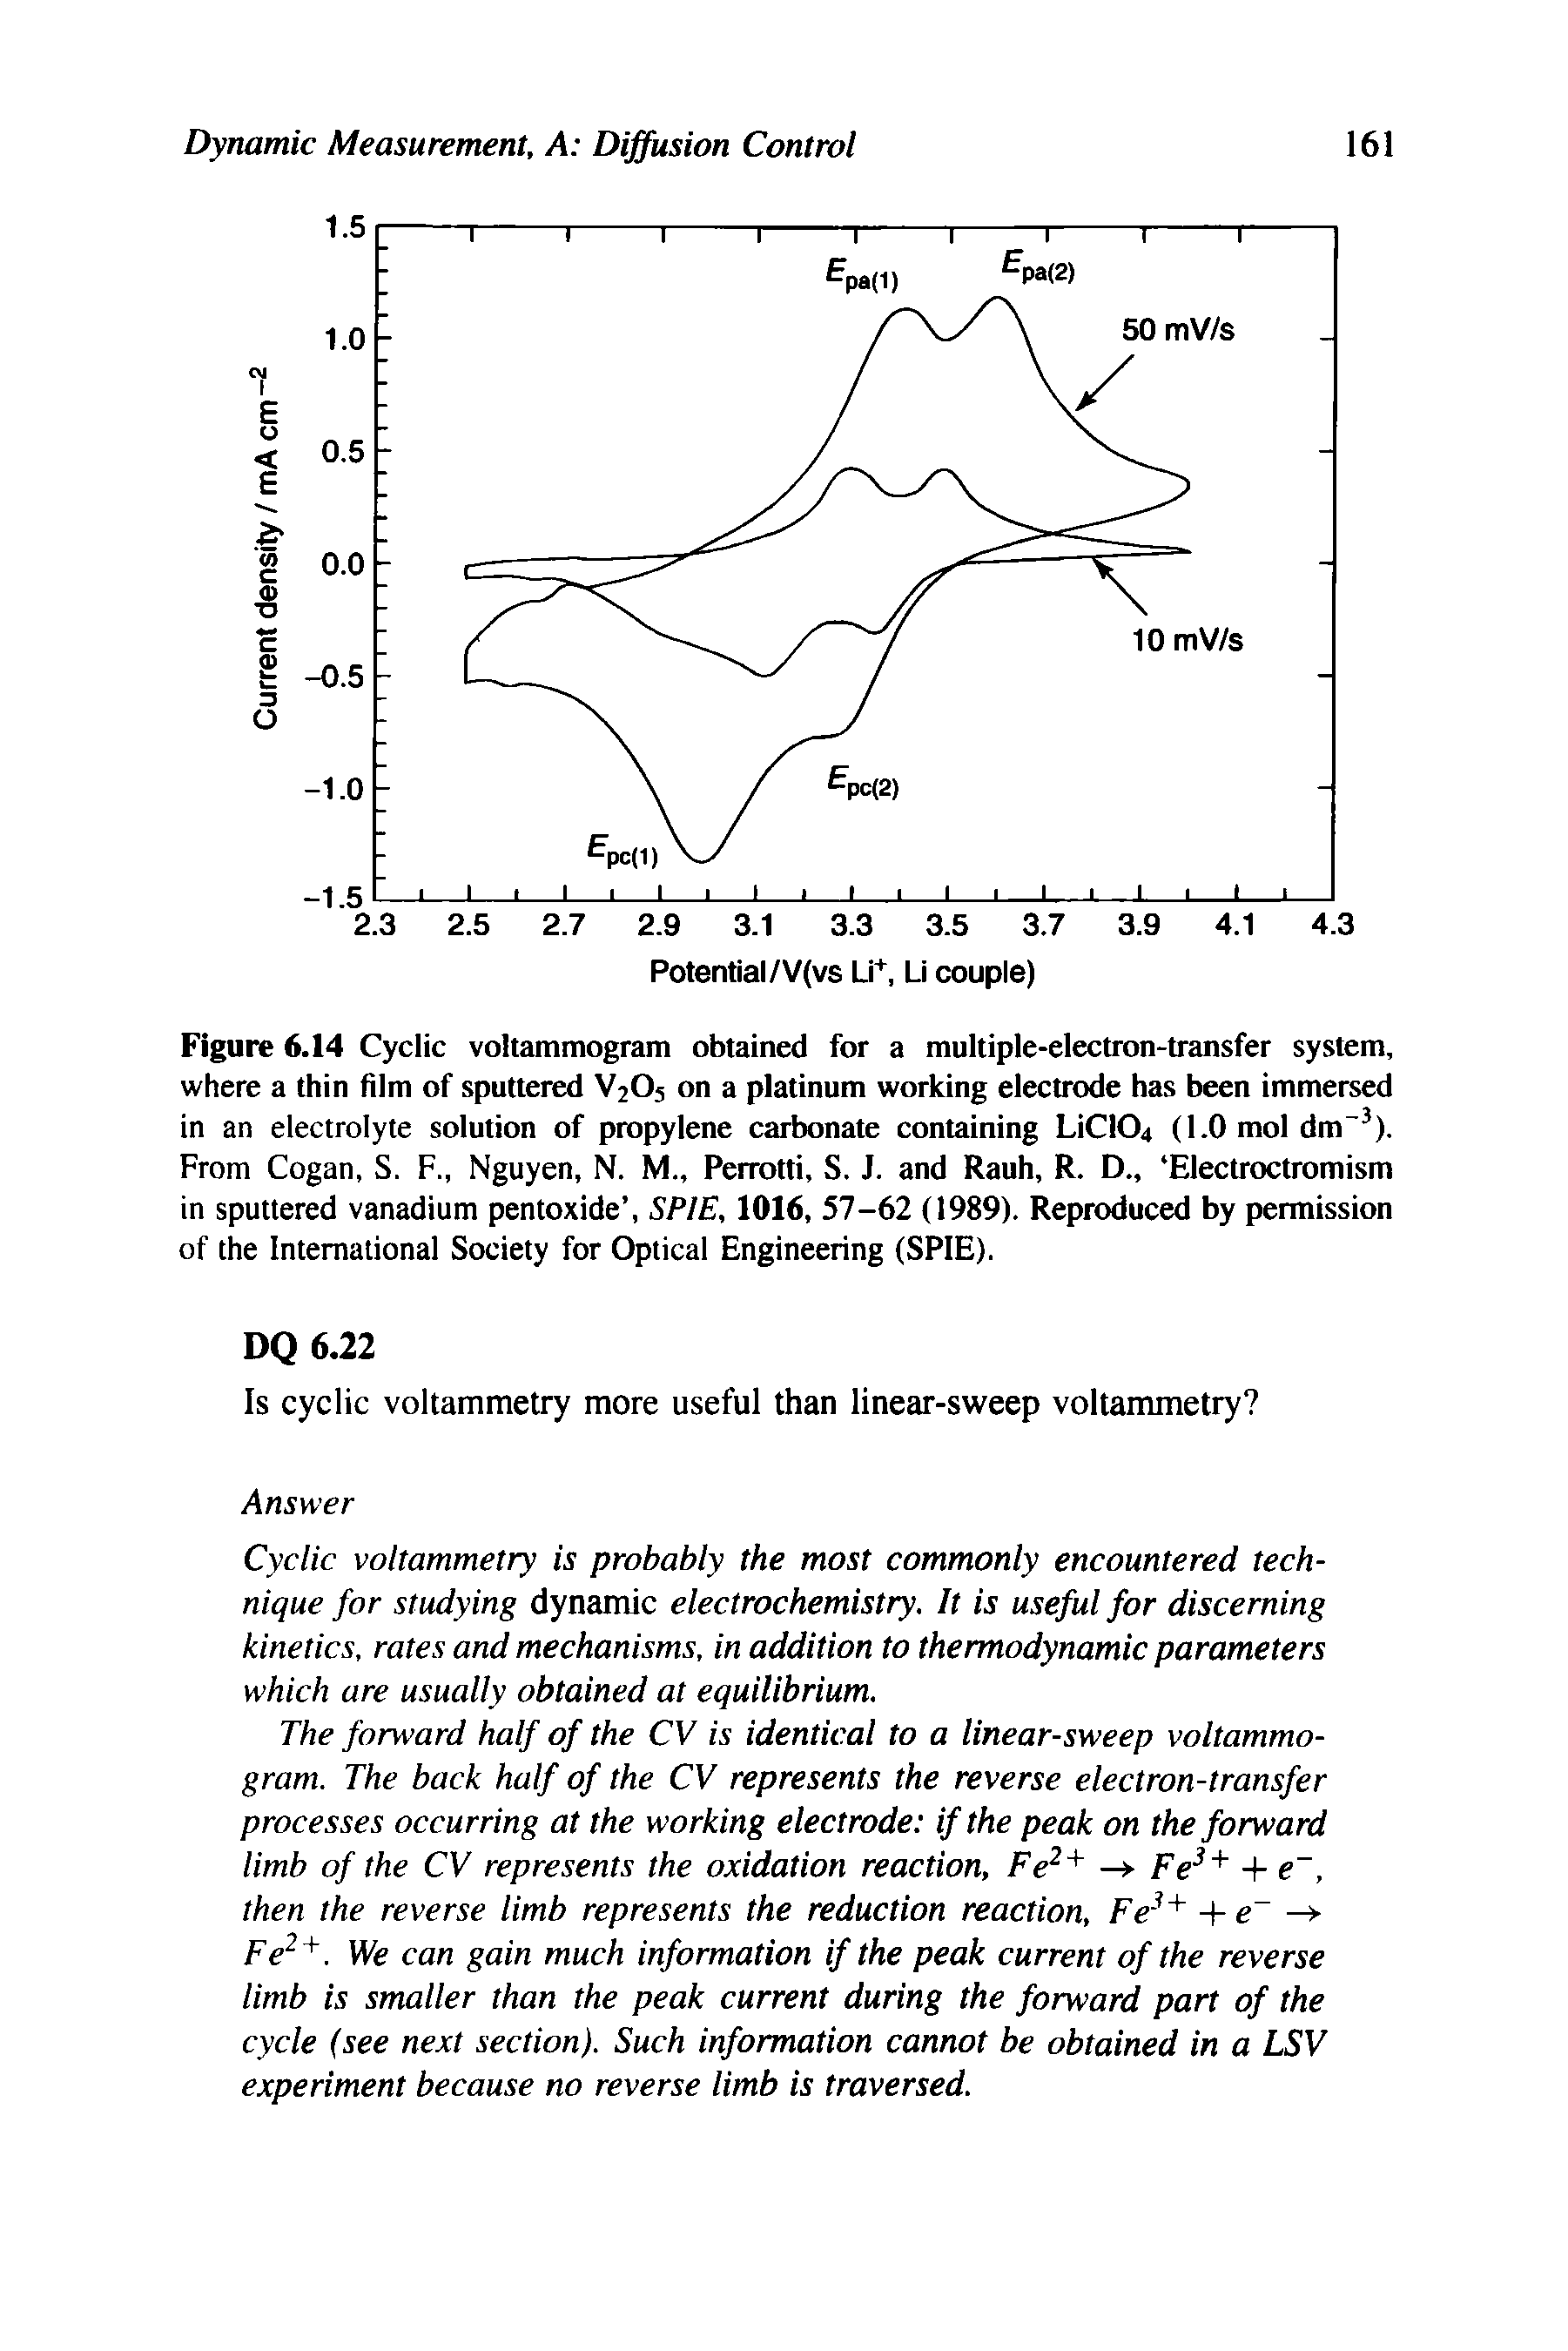 Figure 6.14 Cyclic voltammogram obtained for a multiple-electron-transfer system, where a thin film of sputtered V2O5 on a platinum working electrode has been immersed in an electrolyte solution of propylene carbonate containing LiCI04 (1.0 mol dm ). From Cogan, S. F., Nguyen, N. M Perrotti, S. J. and Rauh, R. D Electroctromism in sputtered vanadium pentoxide , SPIE, 1016, 57-62 (1989). Reproduced by permission of the International Society for Optical Engineering (SPIE).